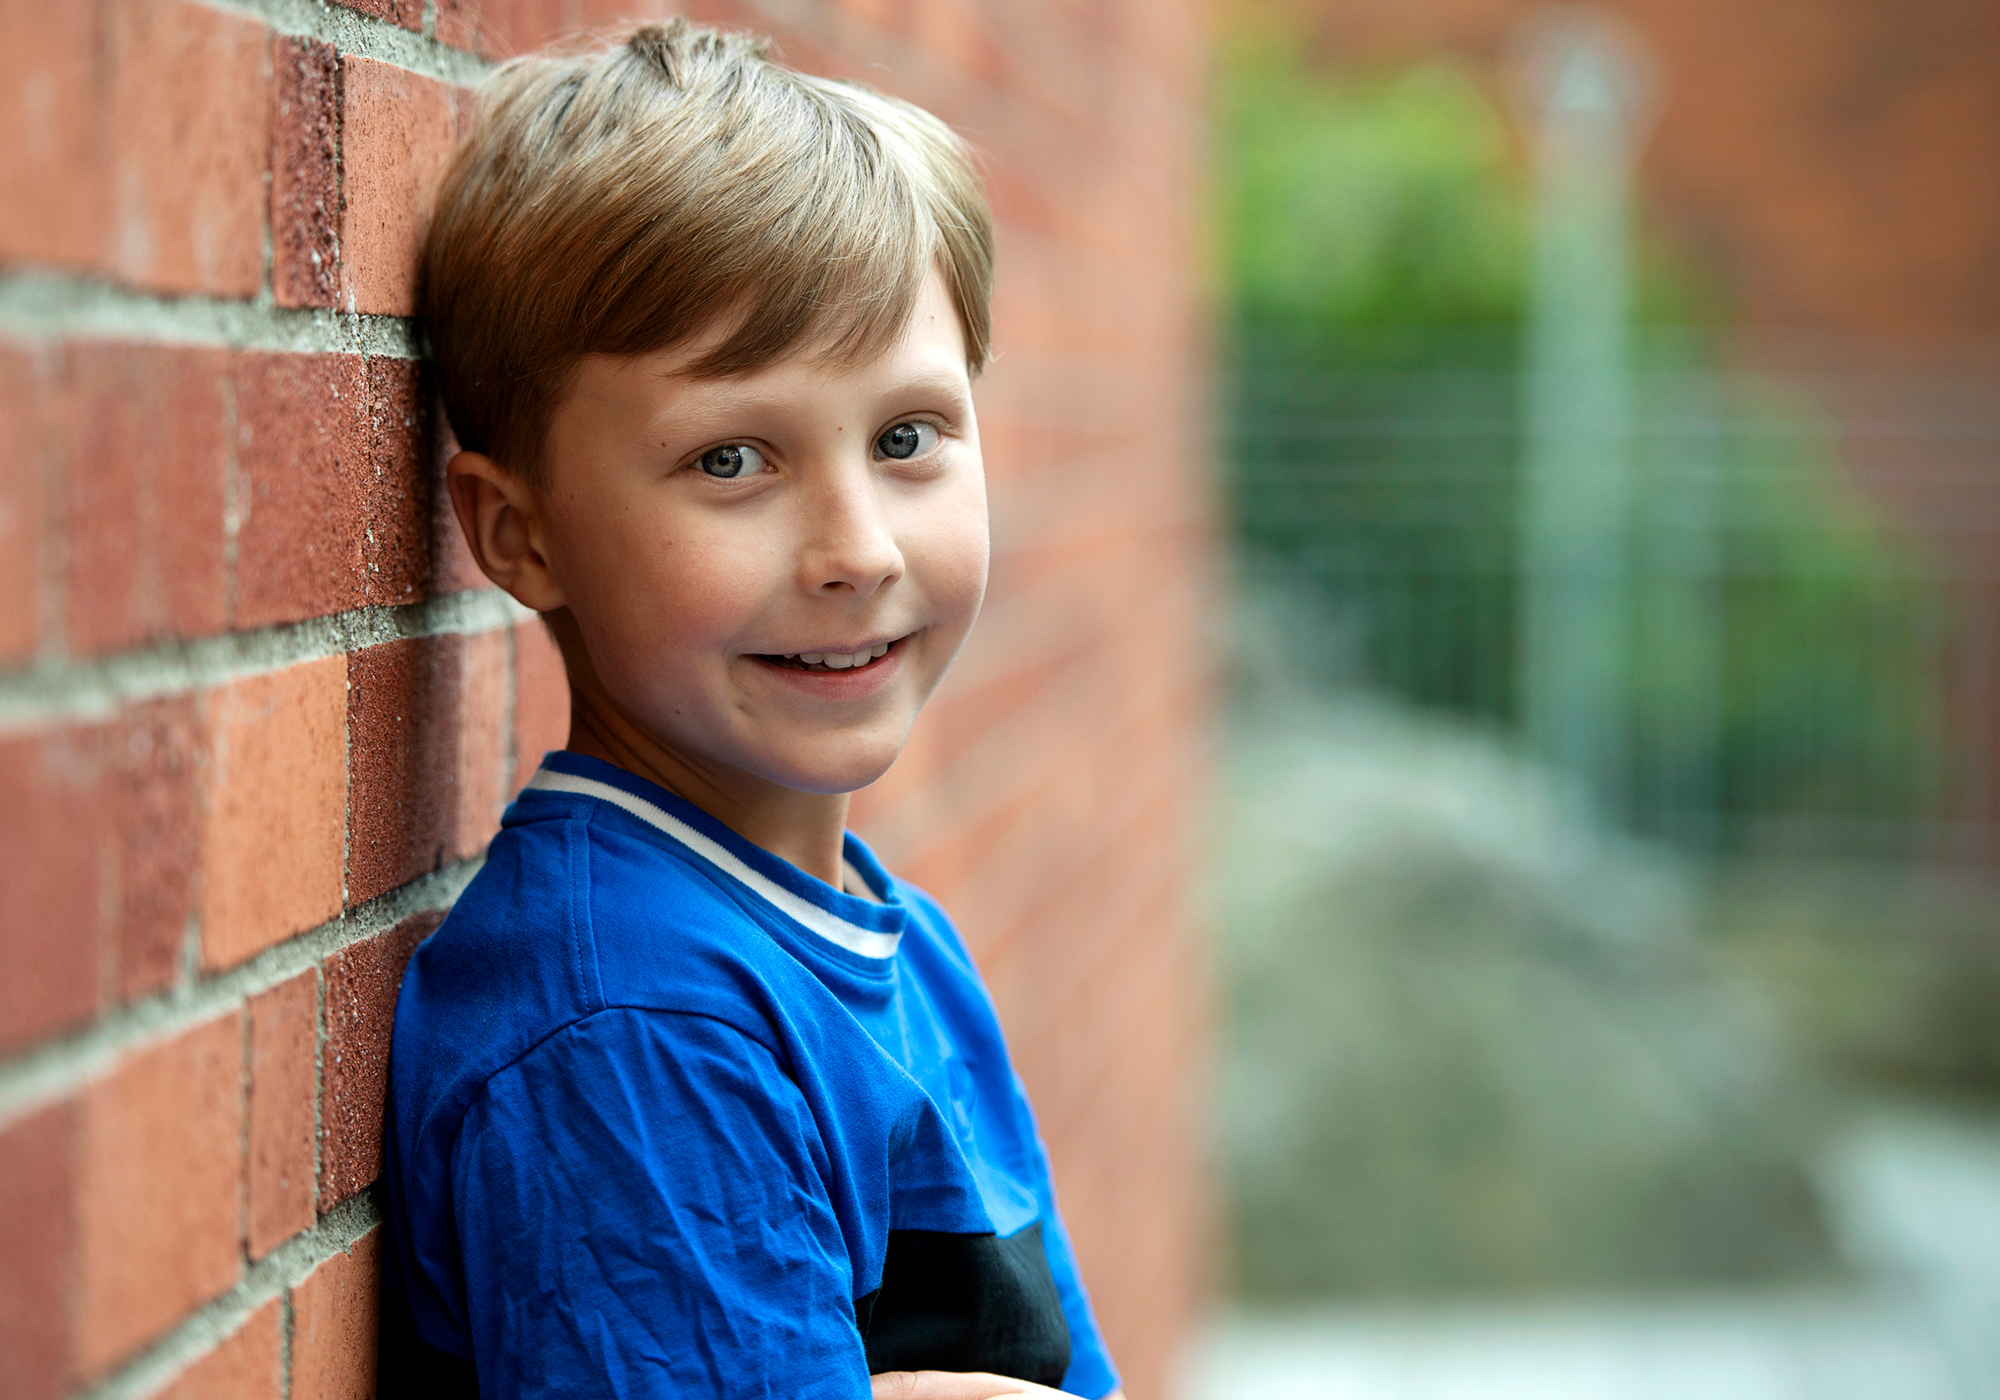 Frank, aged 9, leaning against a brick wall and looking happy.